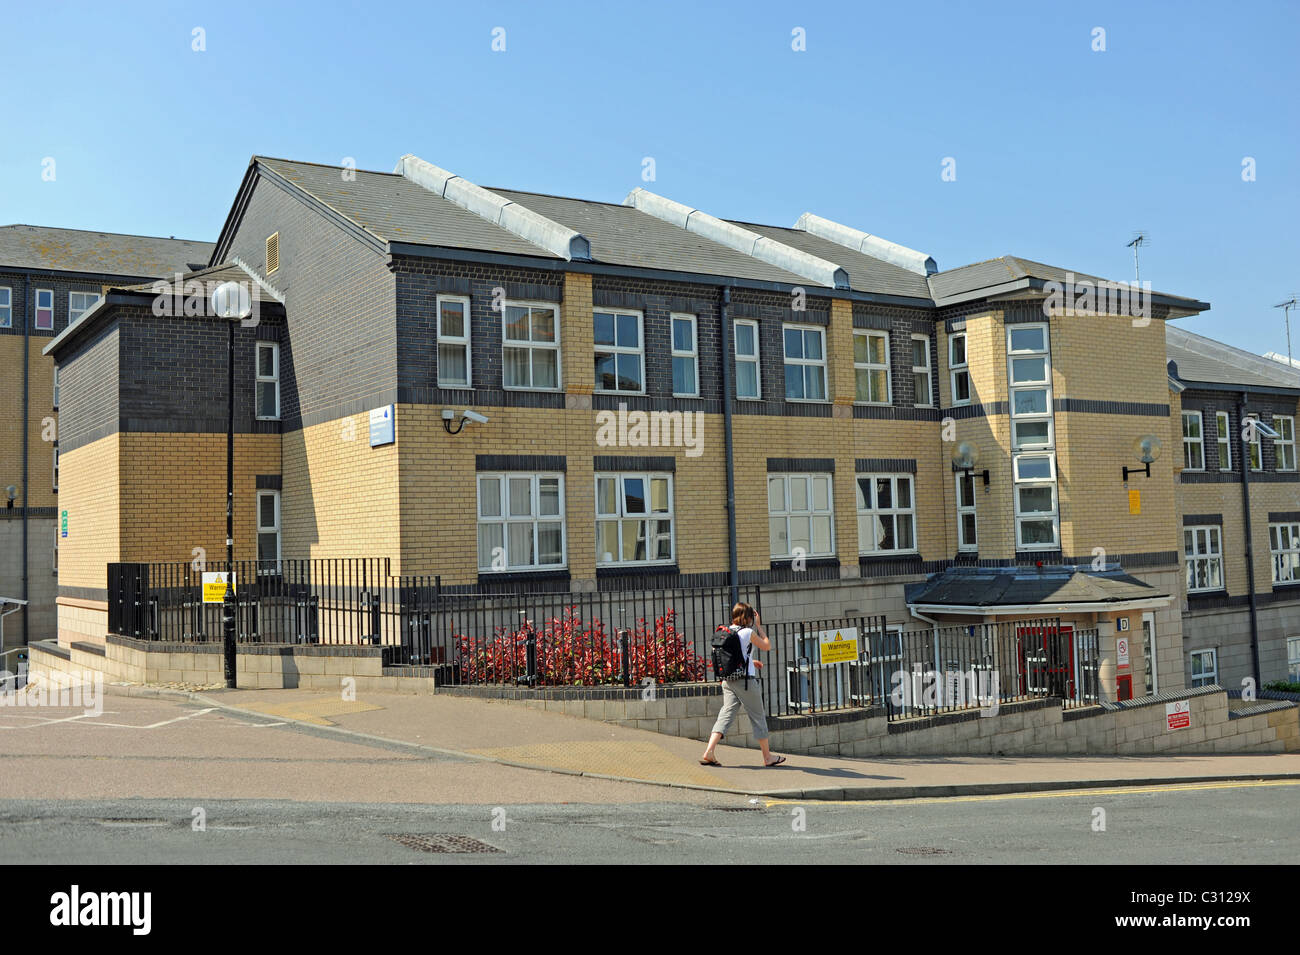 University of Brighton student accommodation in Hanover district of city centre UK Stock Photo